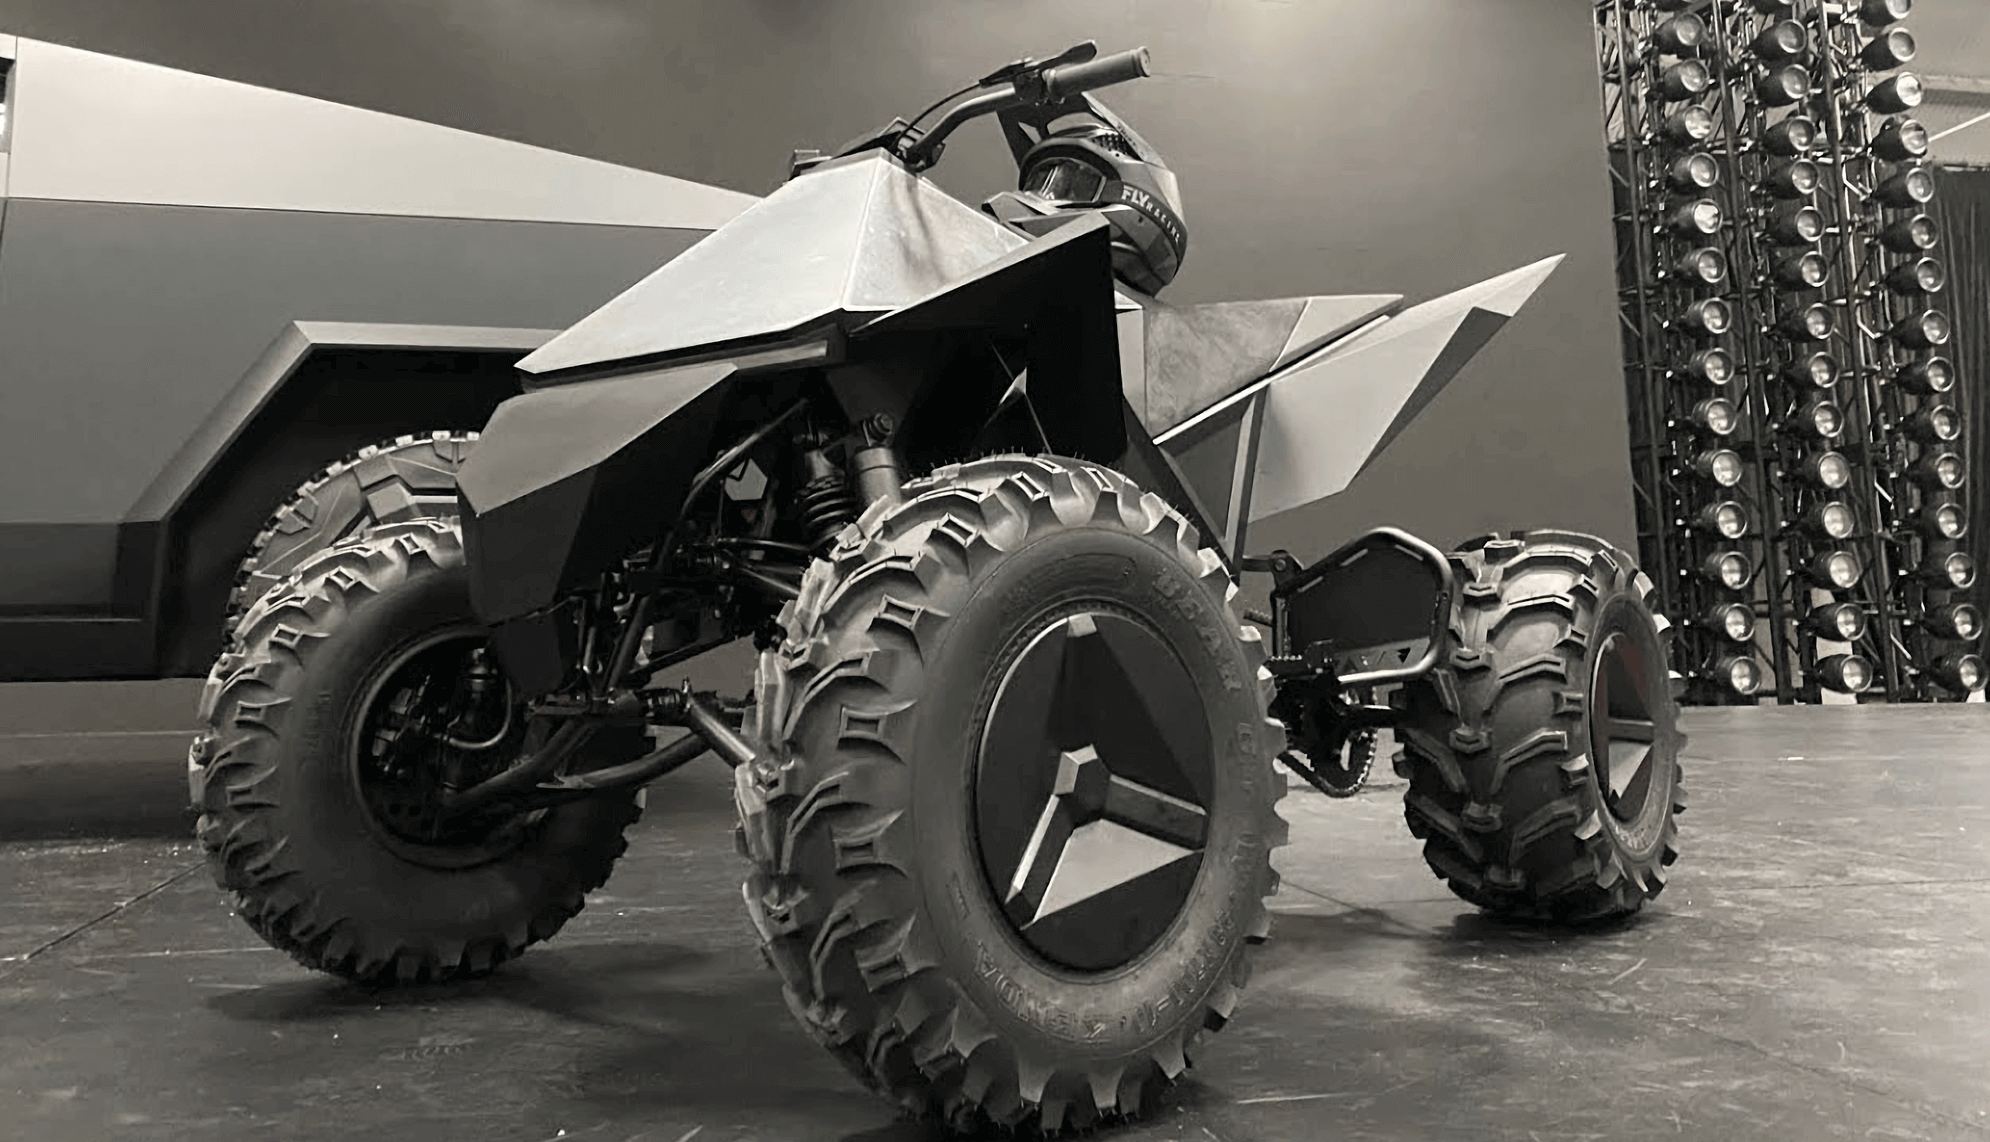 This Tesla ATV clone is an absolute ripper